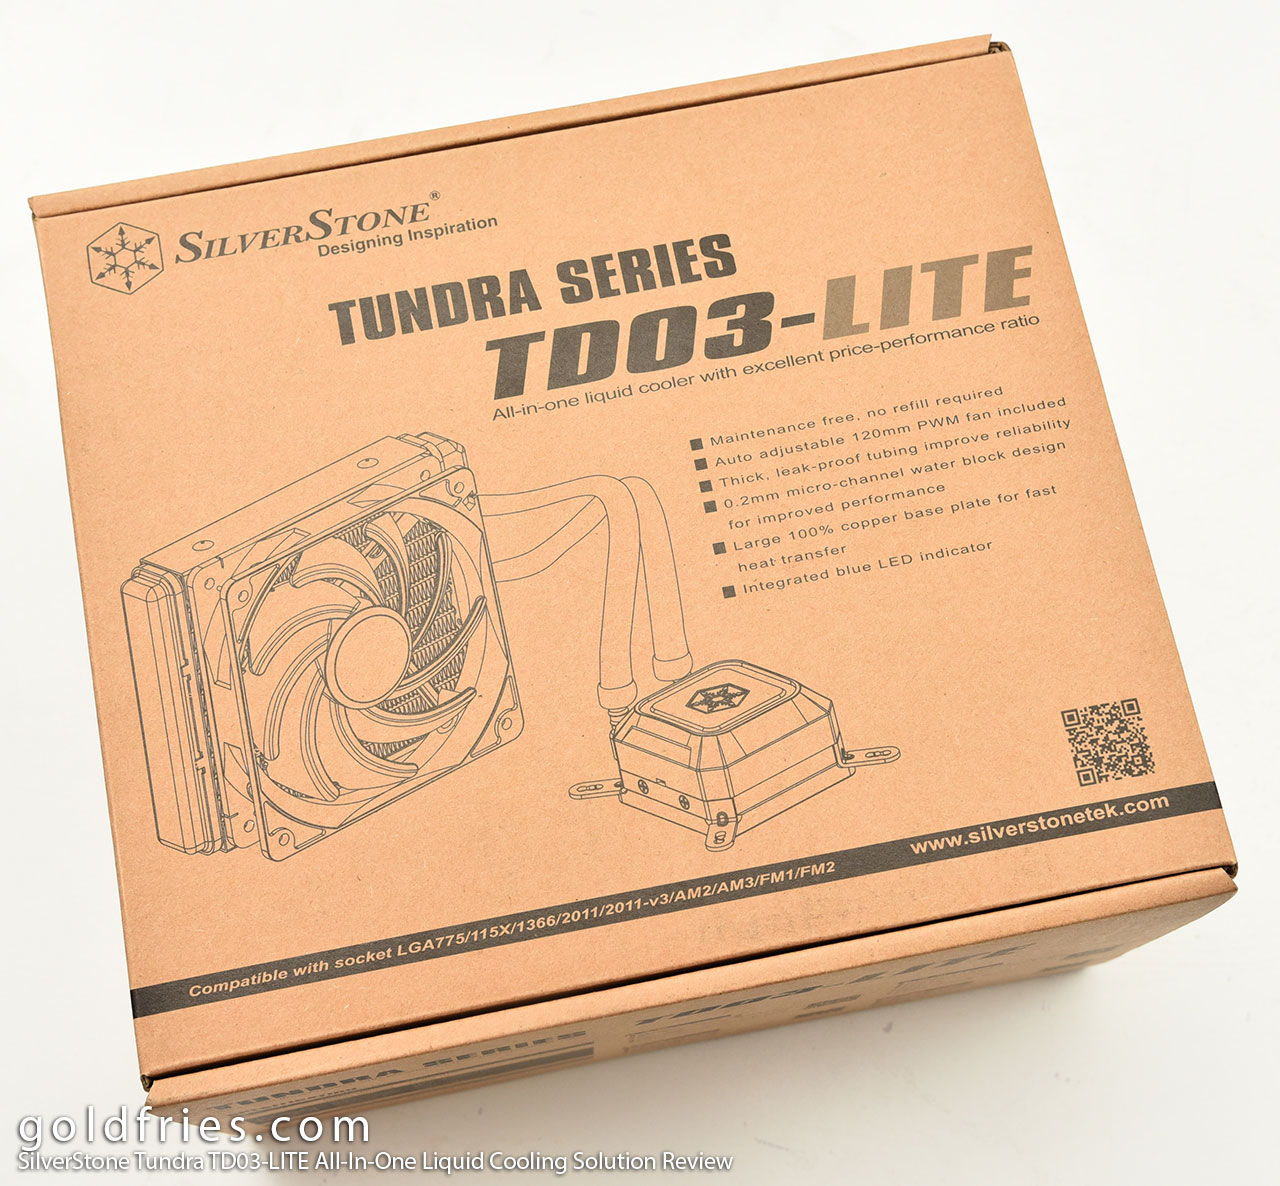 SilverStone Tundra TD03-LITE All-In-One Liquid Cooling Solution Review